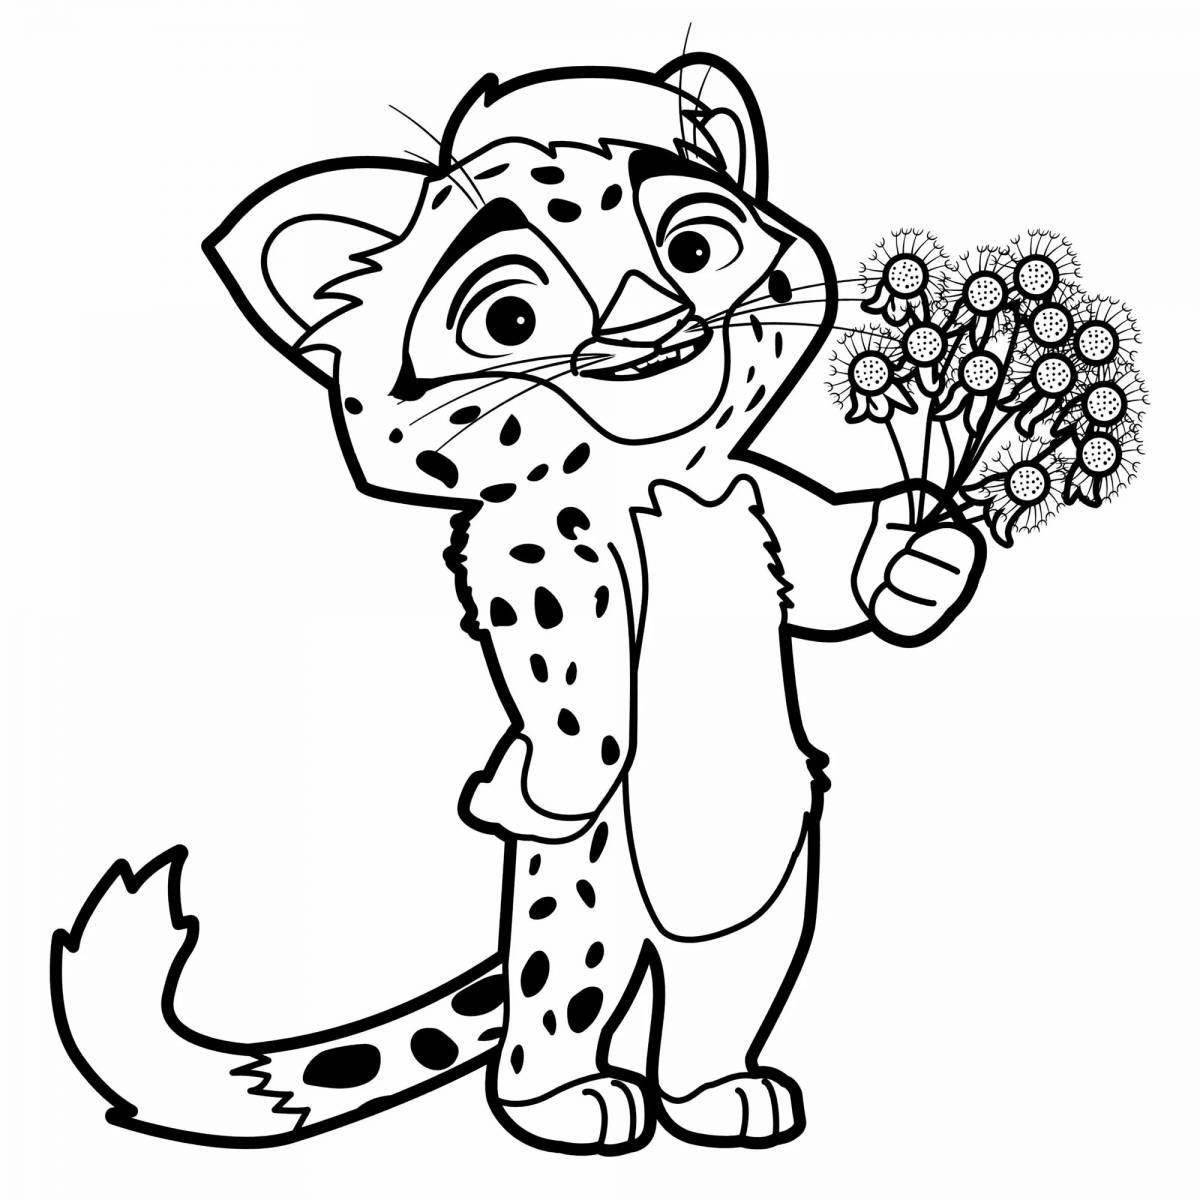 Colorful leo and tig coloring page